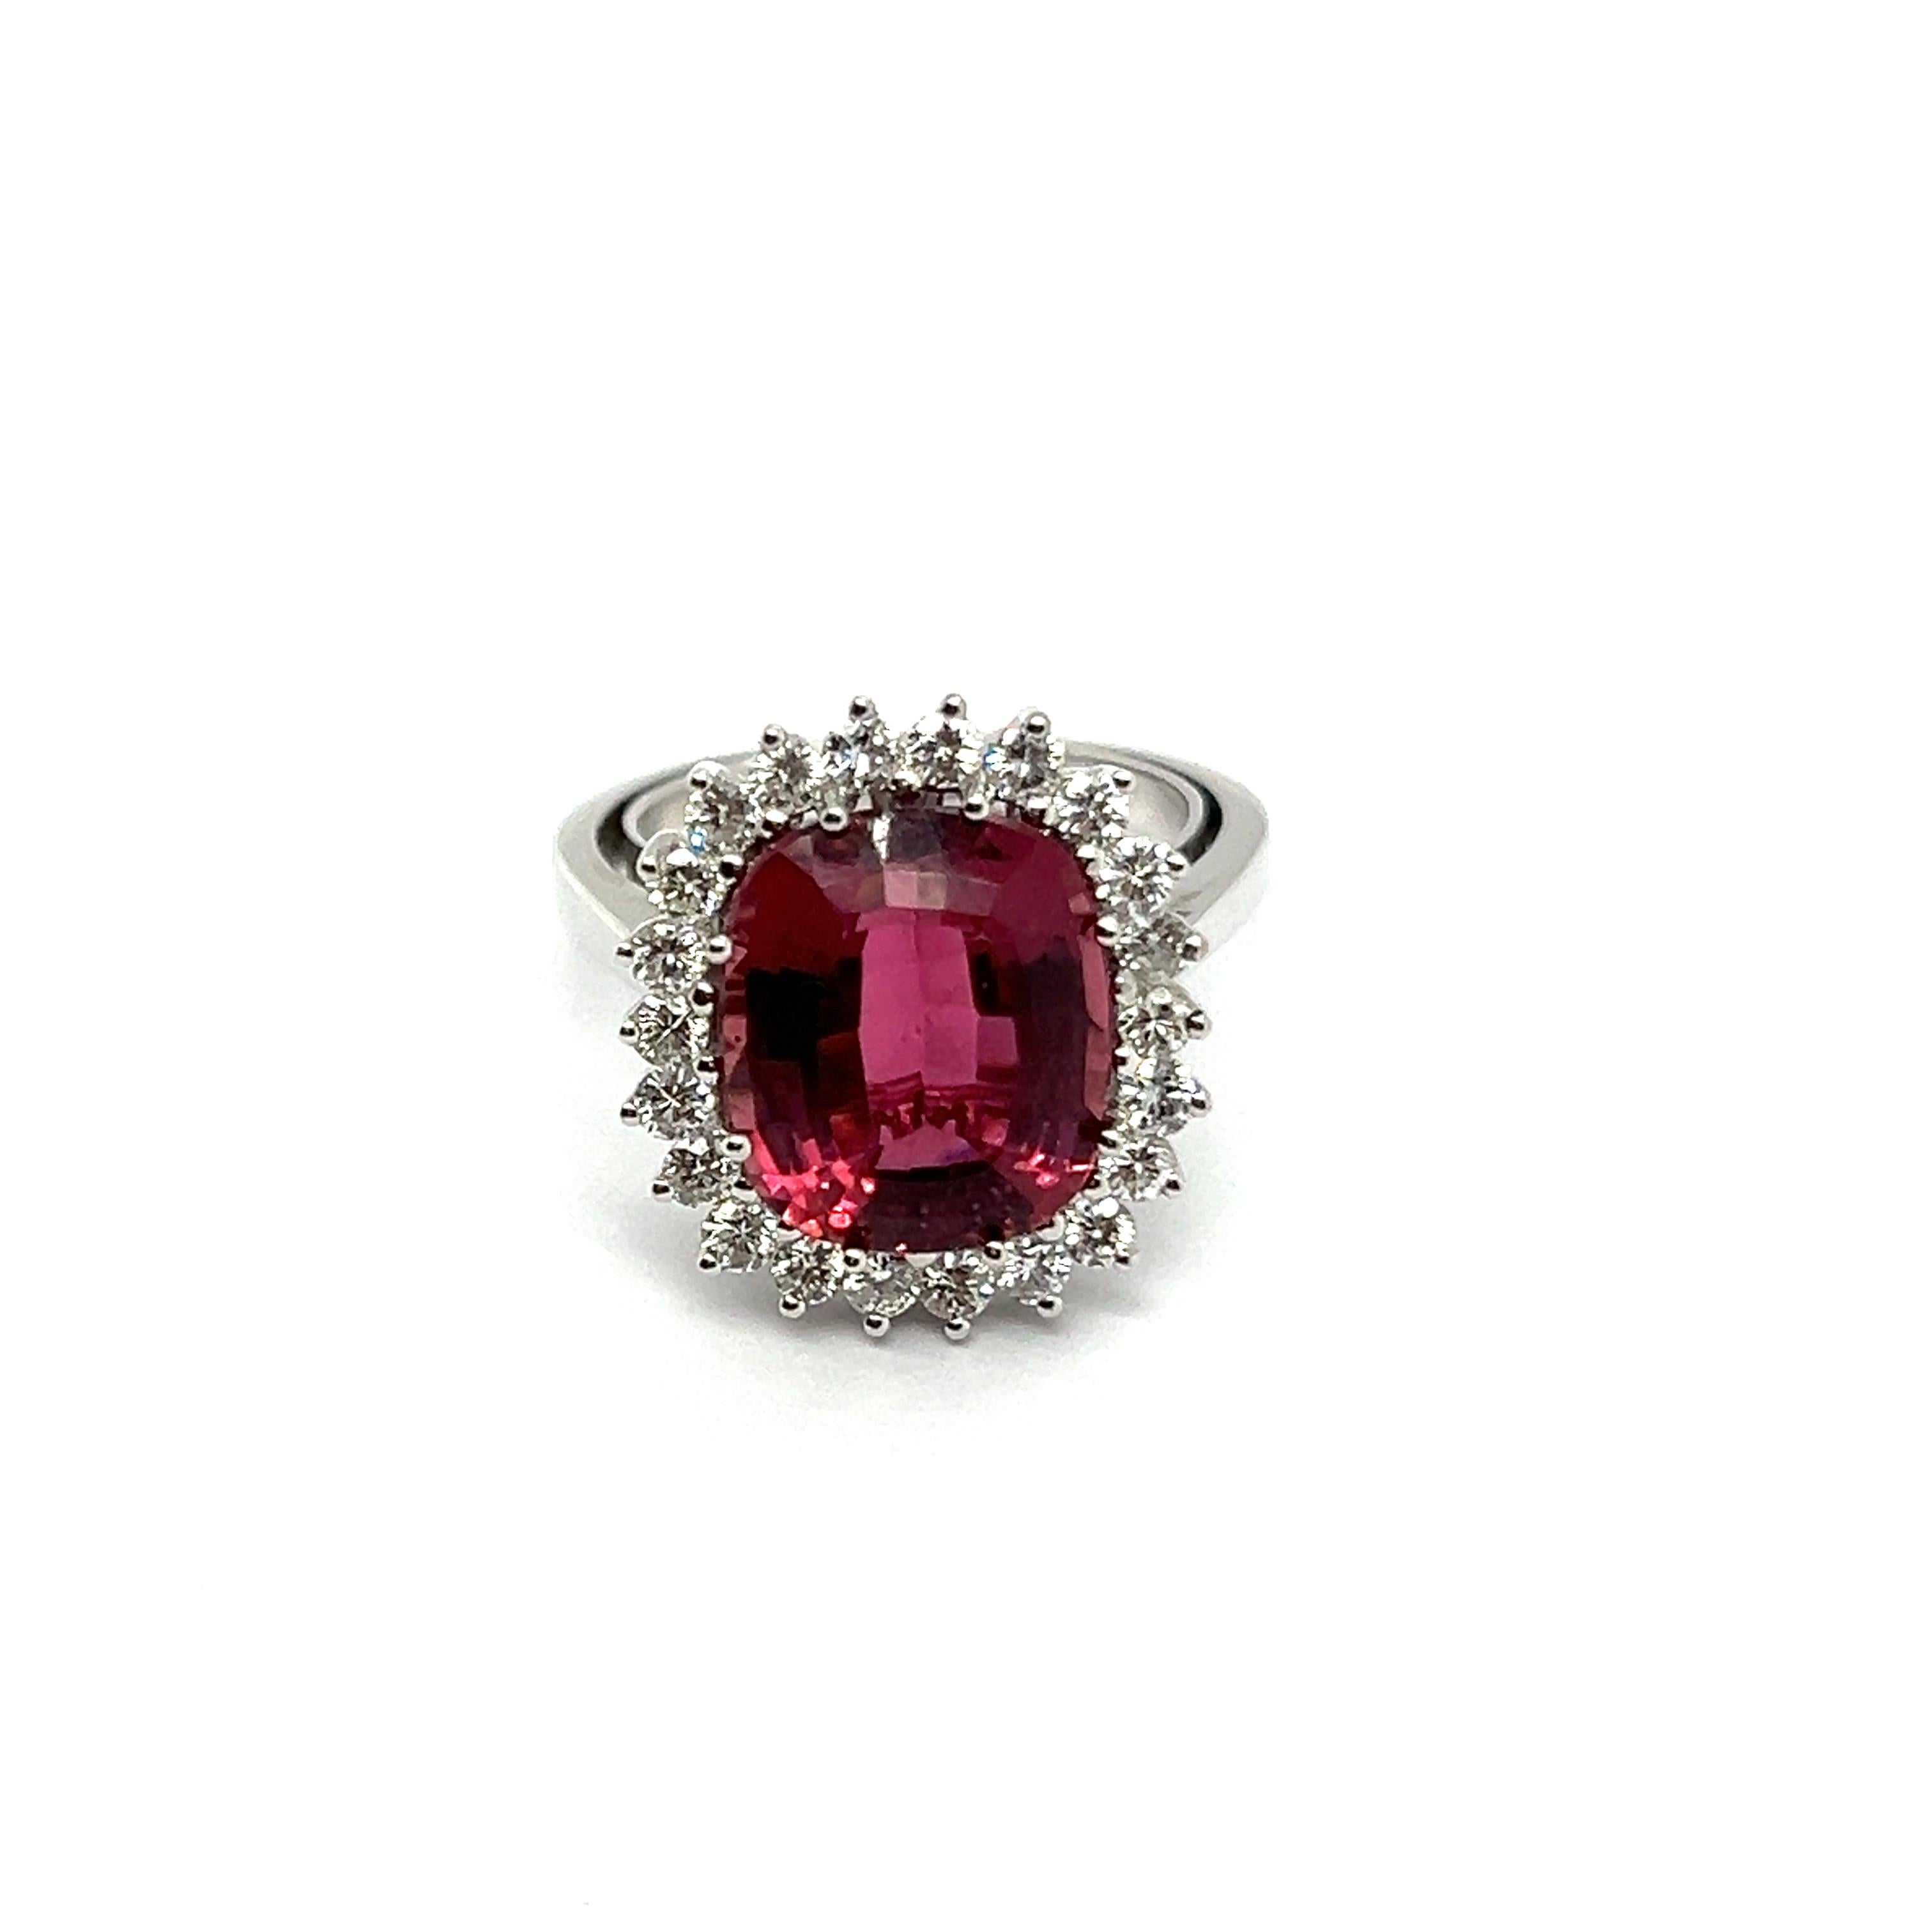  Cocktail Ring with Pink Tourmaline & Diamond in 18 Karat White Gold For Sale 7